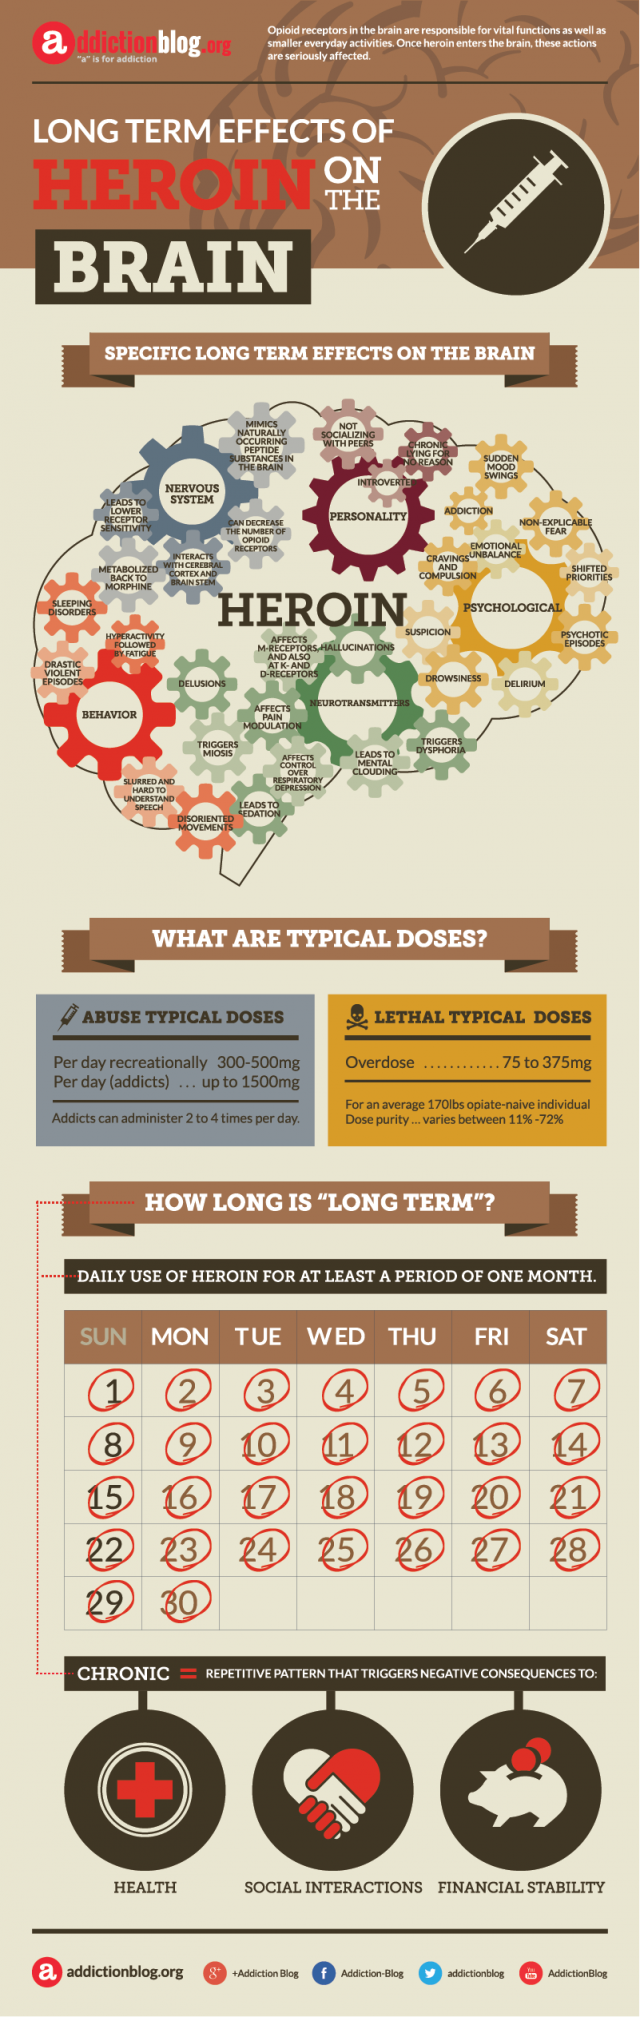 Long term effects of heroin on the brain (INFOGRAPHIC)